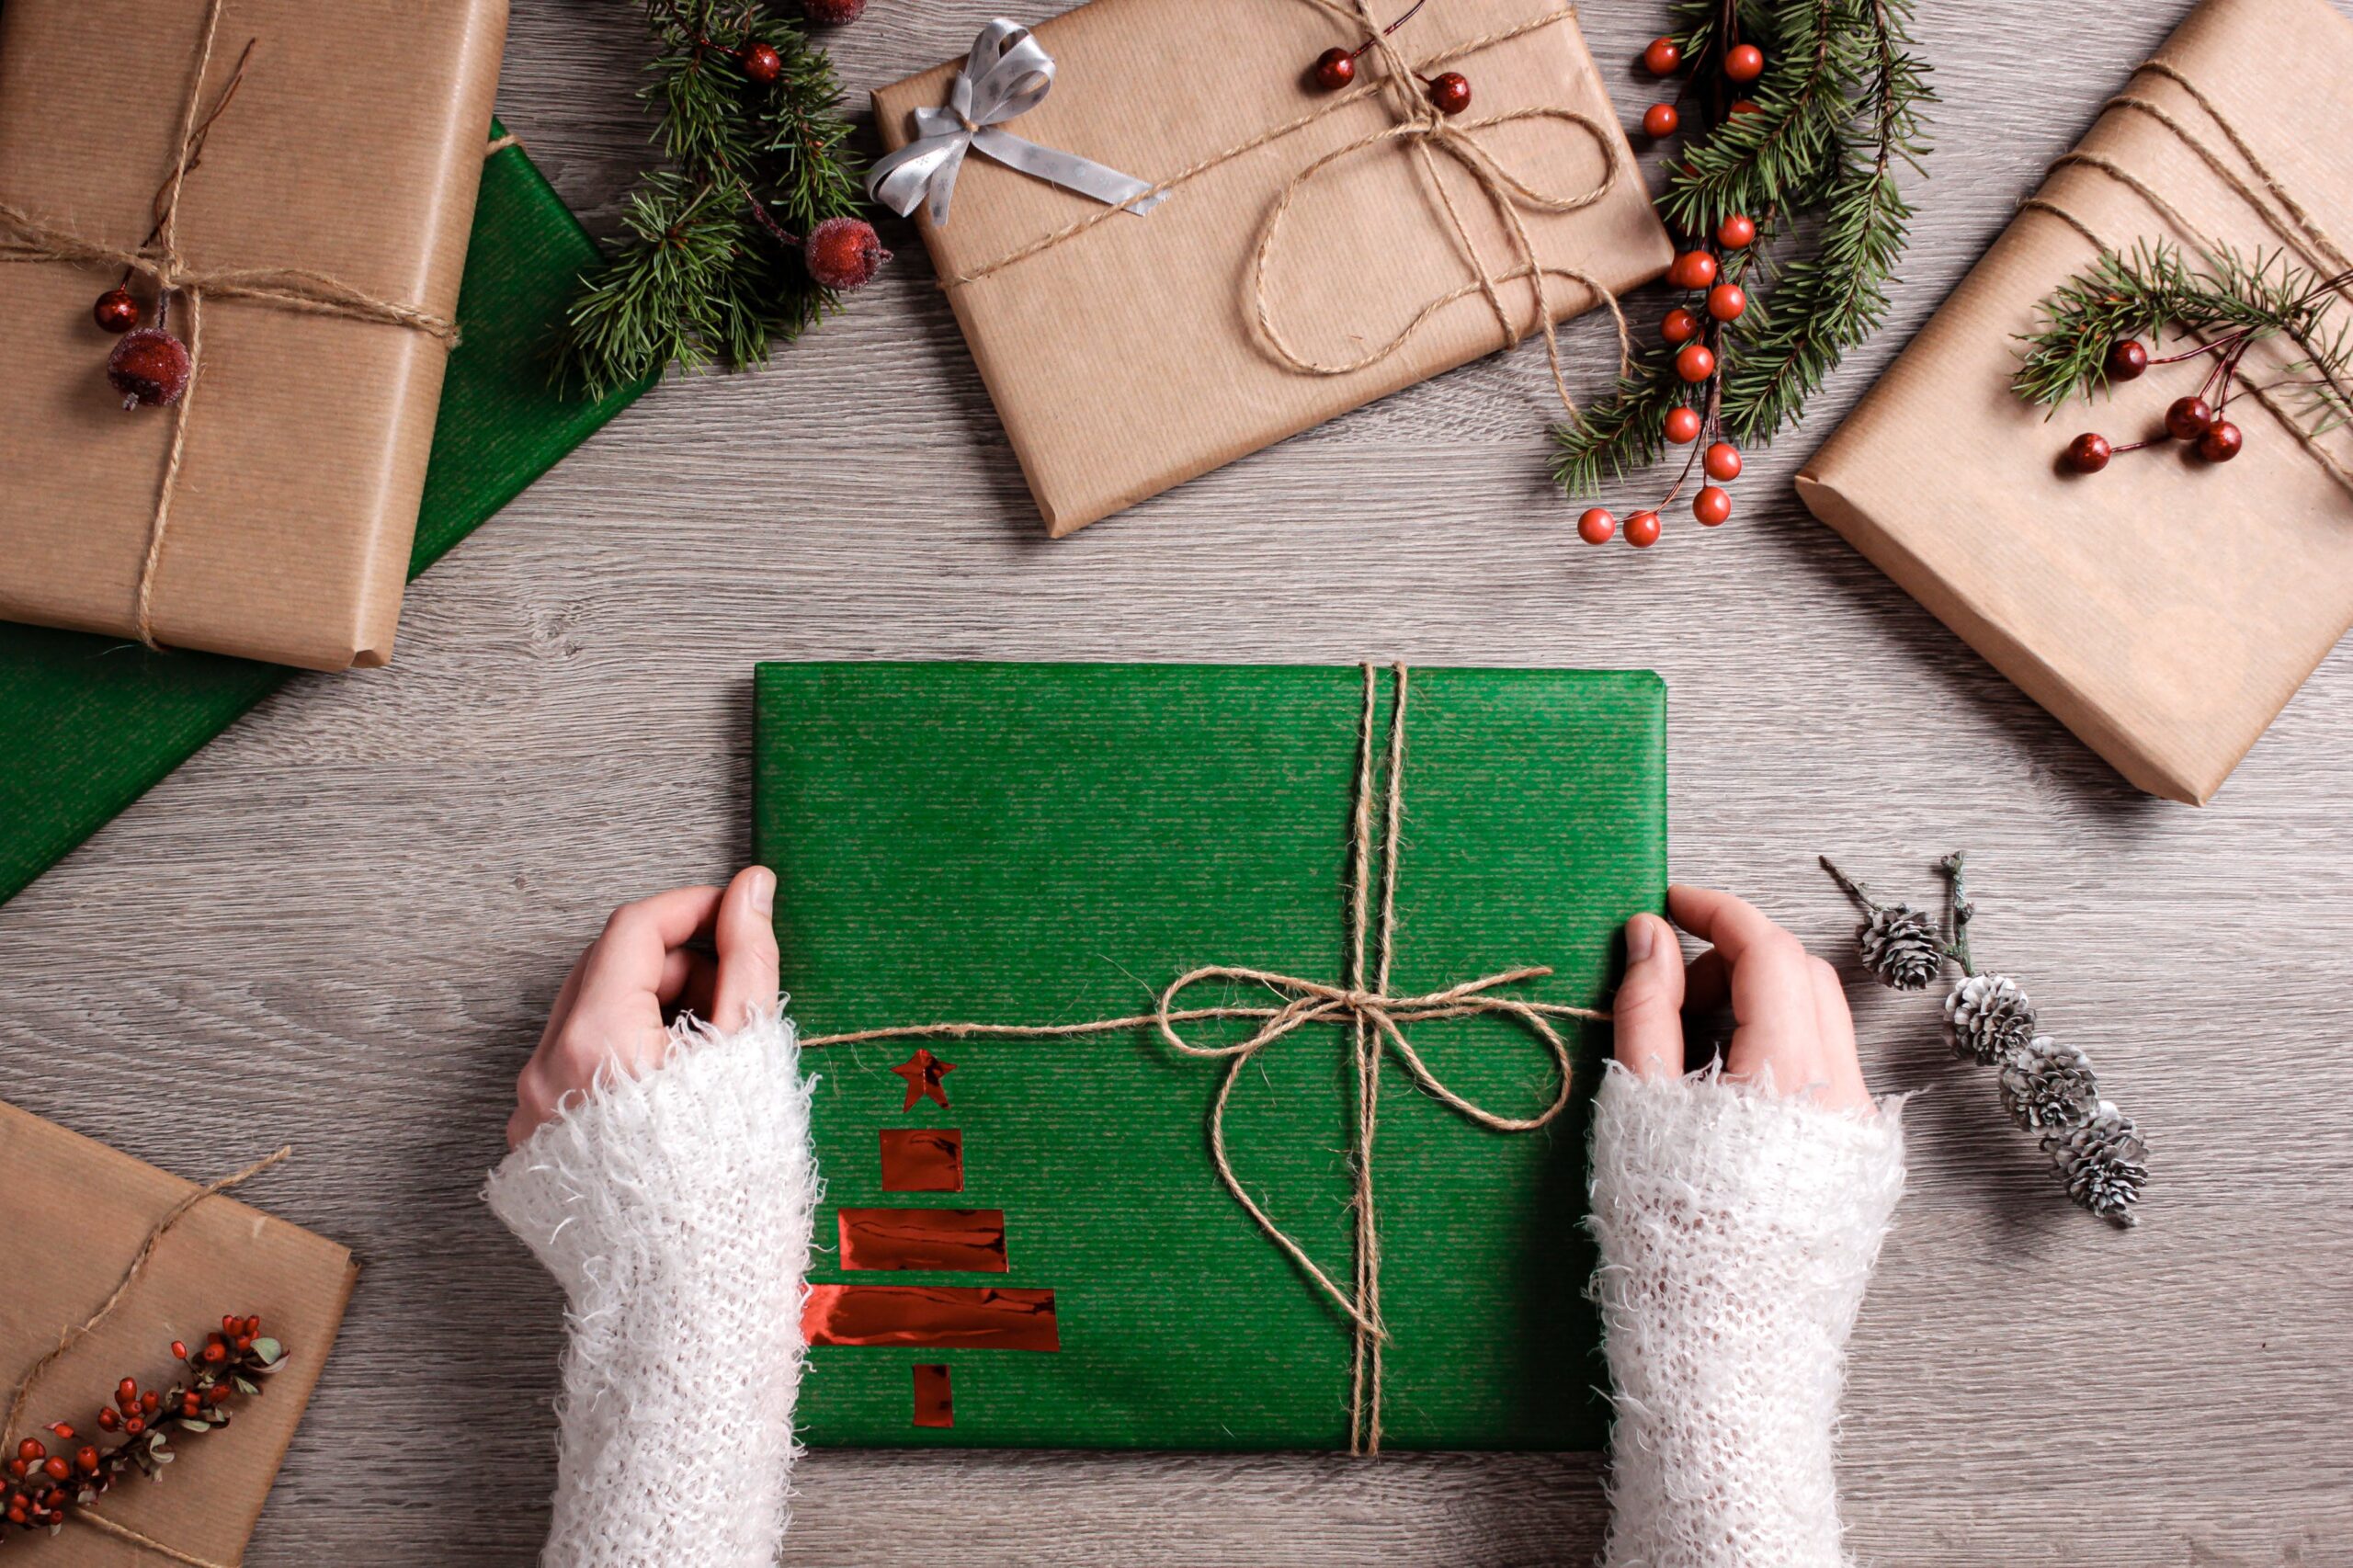 What to do with unwanted Christmas presents - the best options for unloved gifts